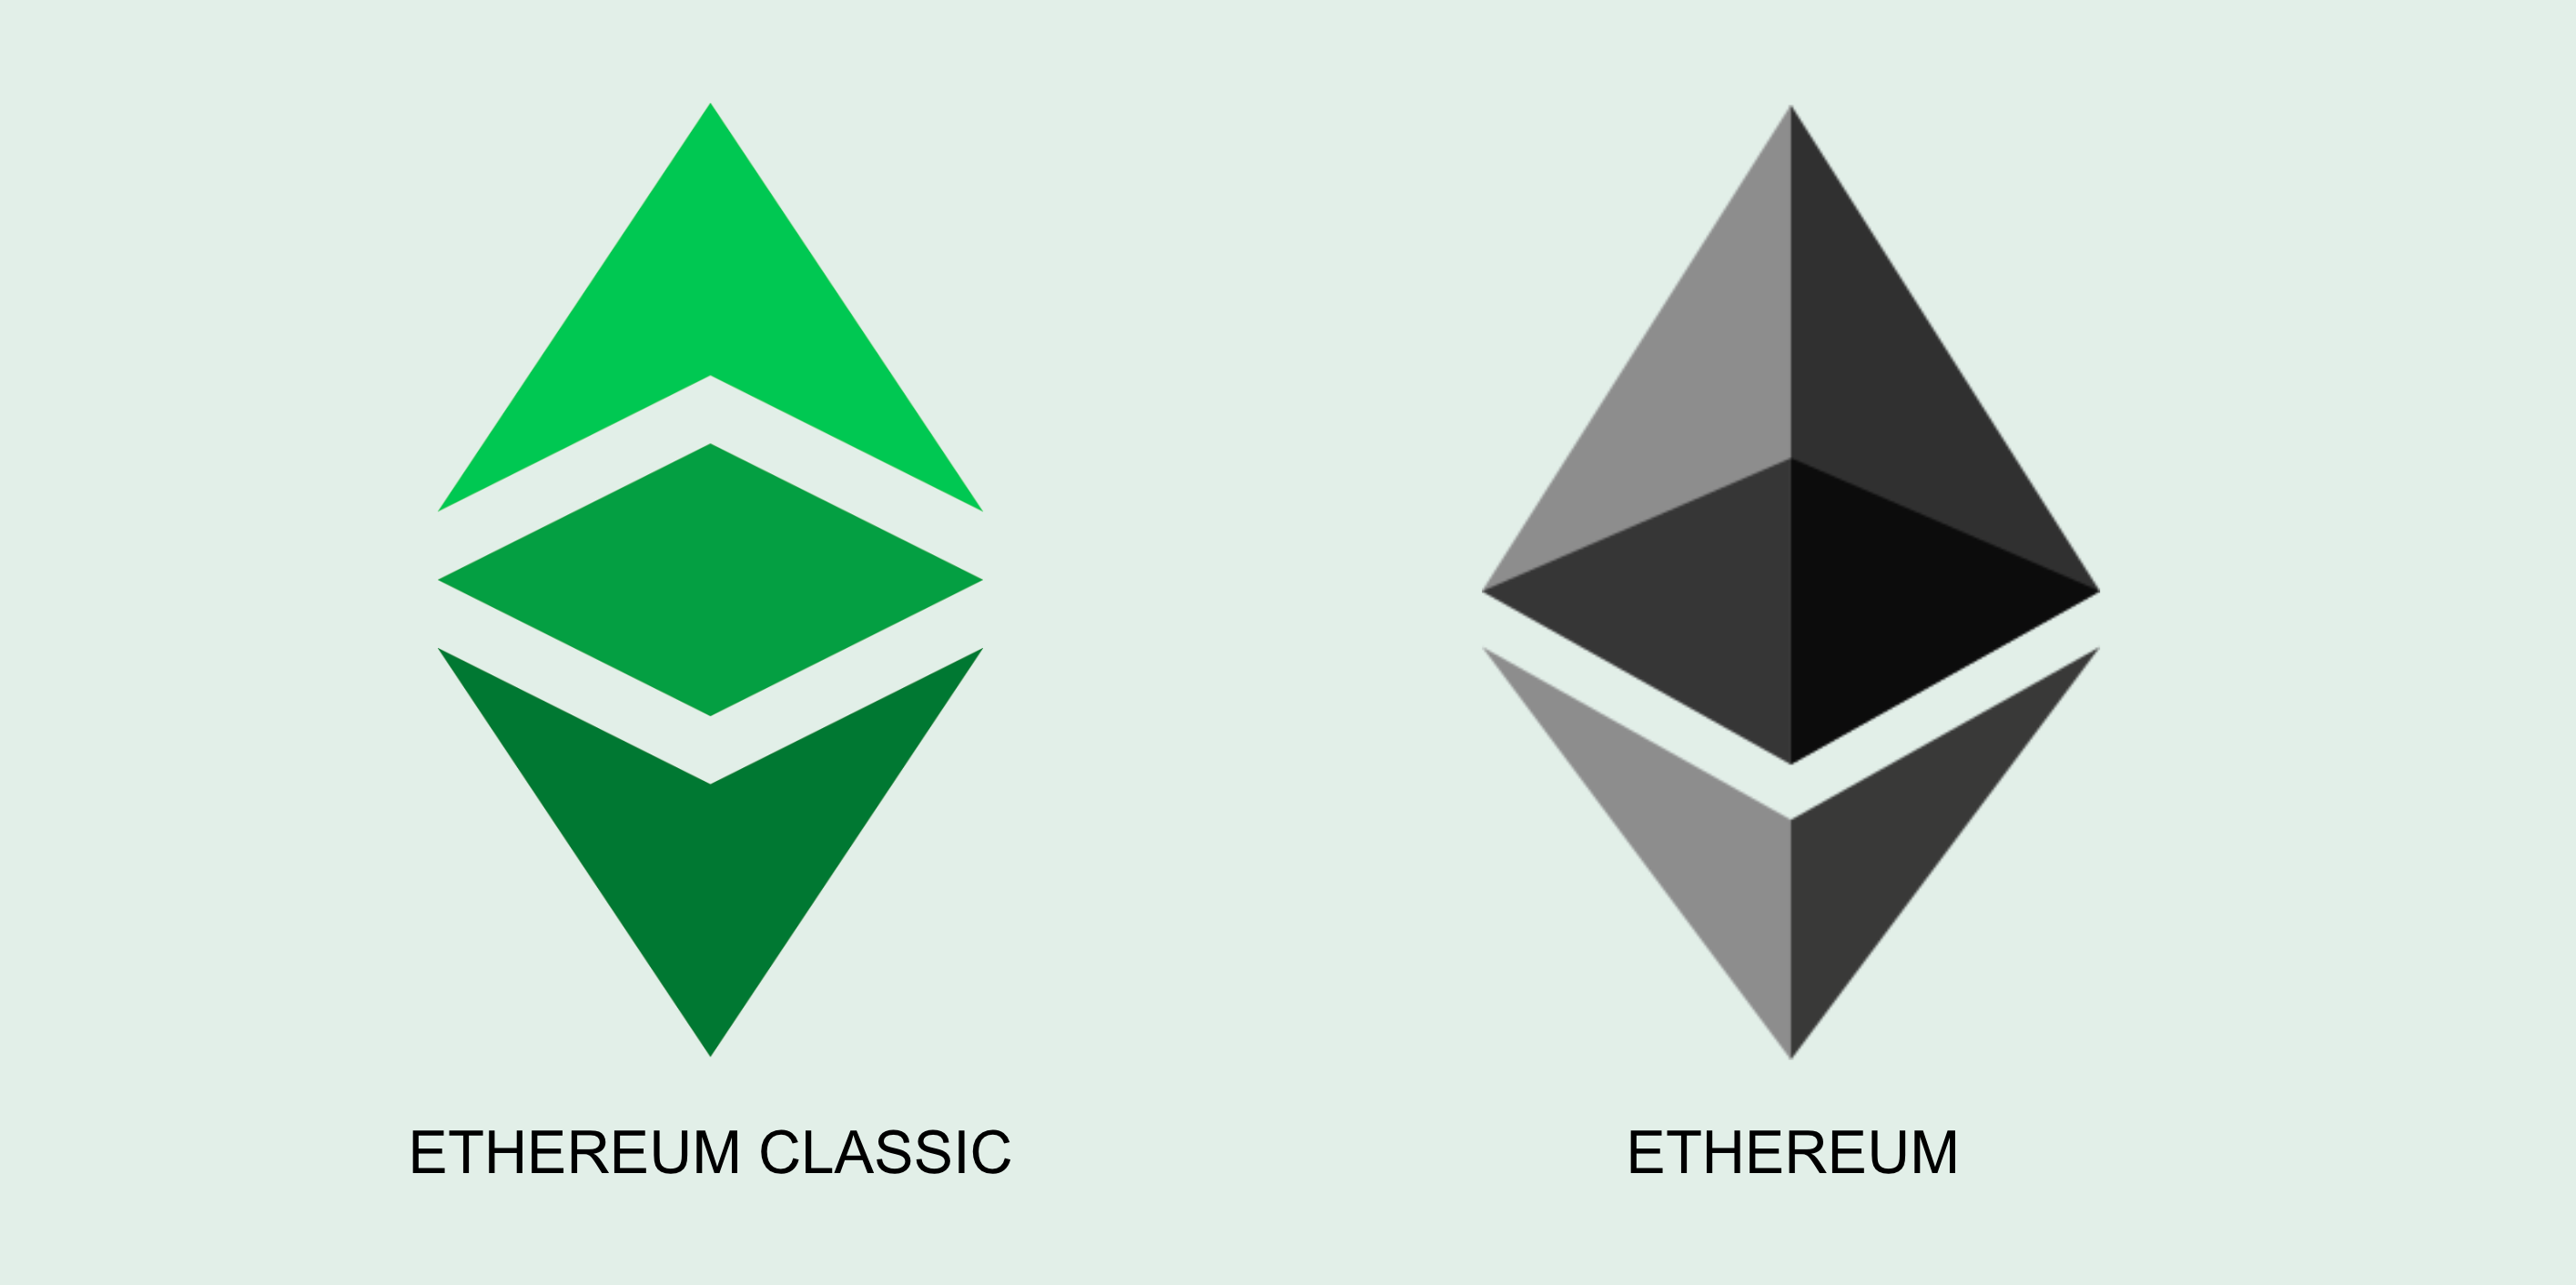 Almost $, in Ethereum Classic coin stolen by forking its blockchain | Ars Technica